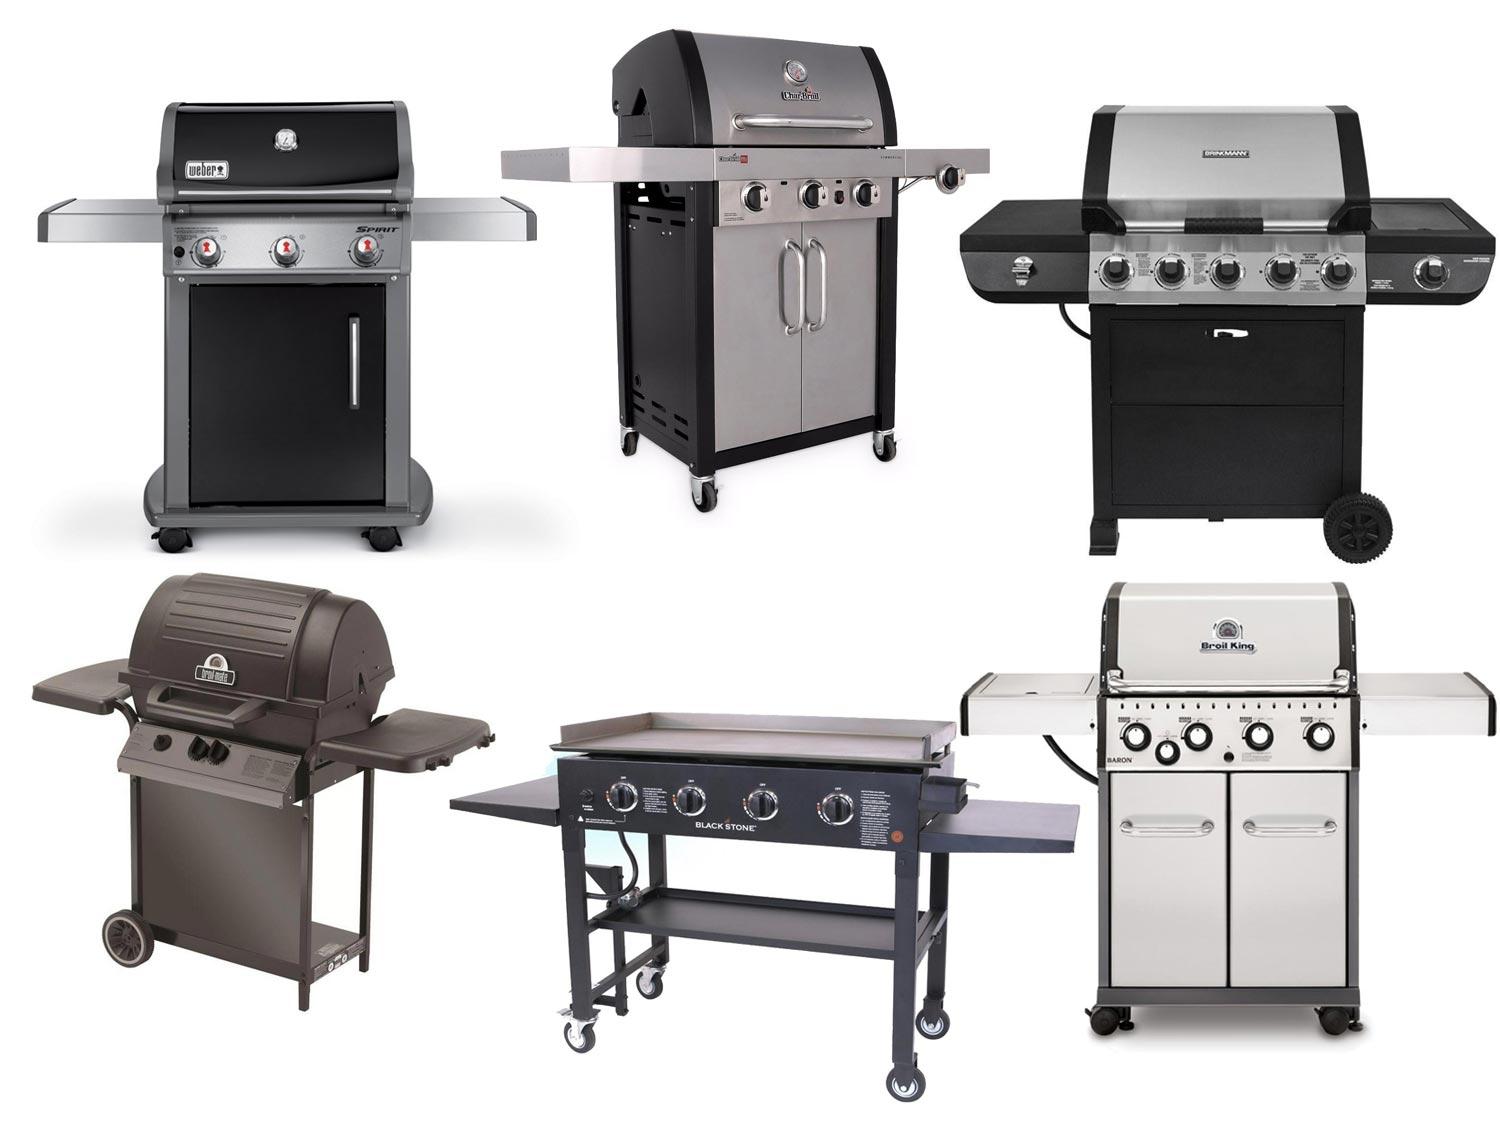 Gas Grill Brands Logo - The Best Gas Grills Under $500 | Serious Eats